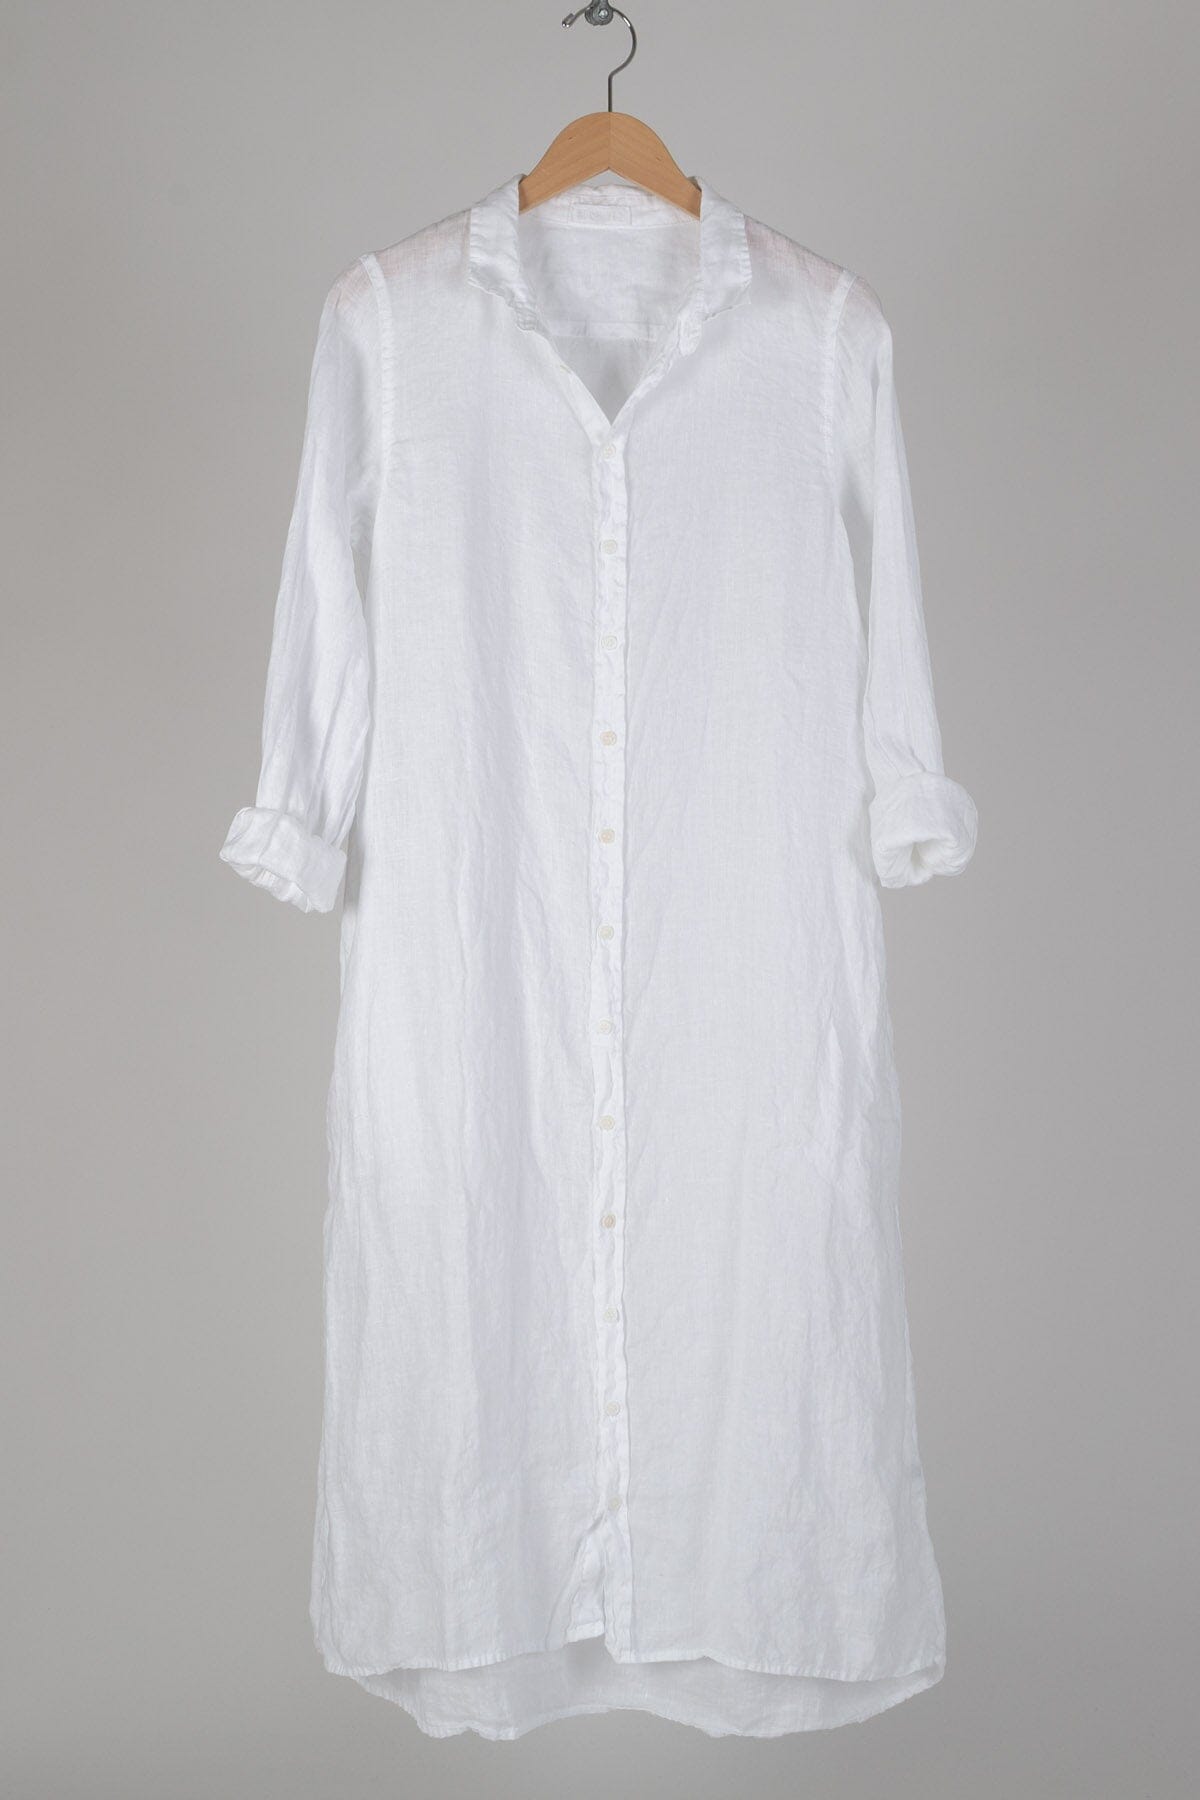 Maxi - Linen S17 - Solid Linen Dresses CP Shades white